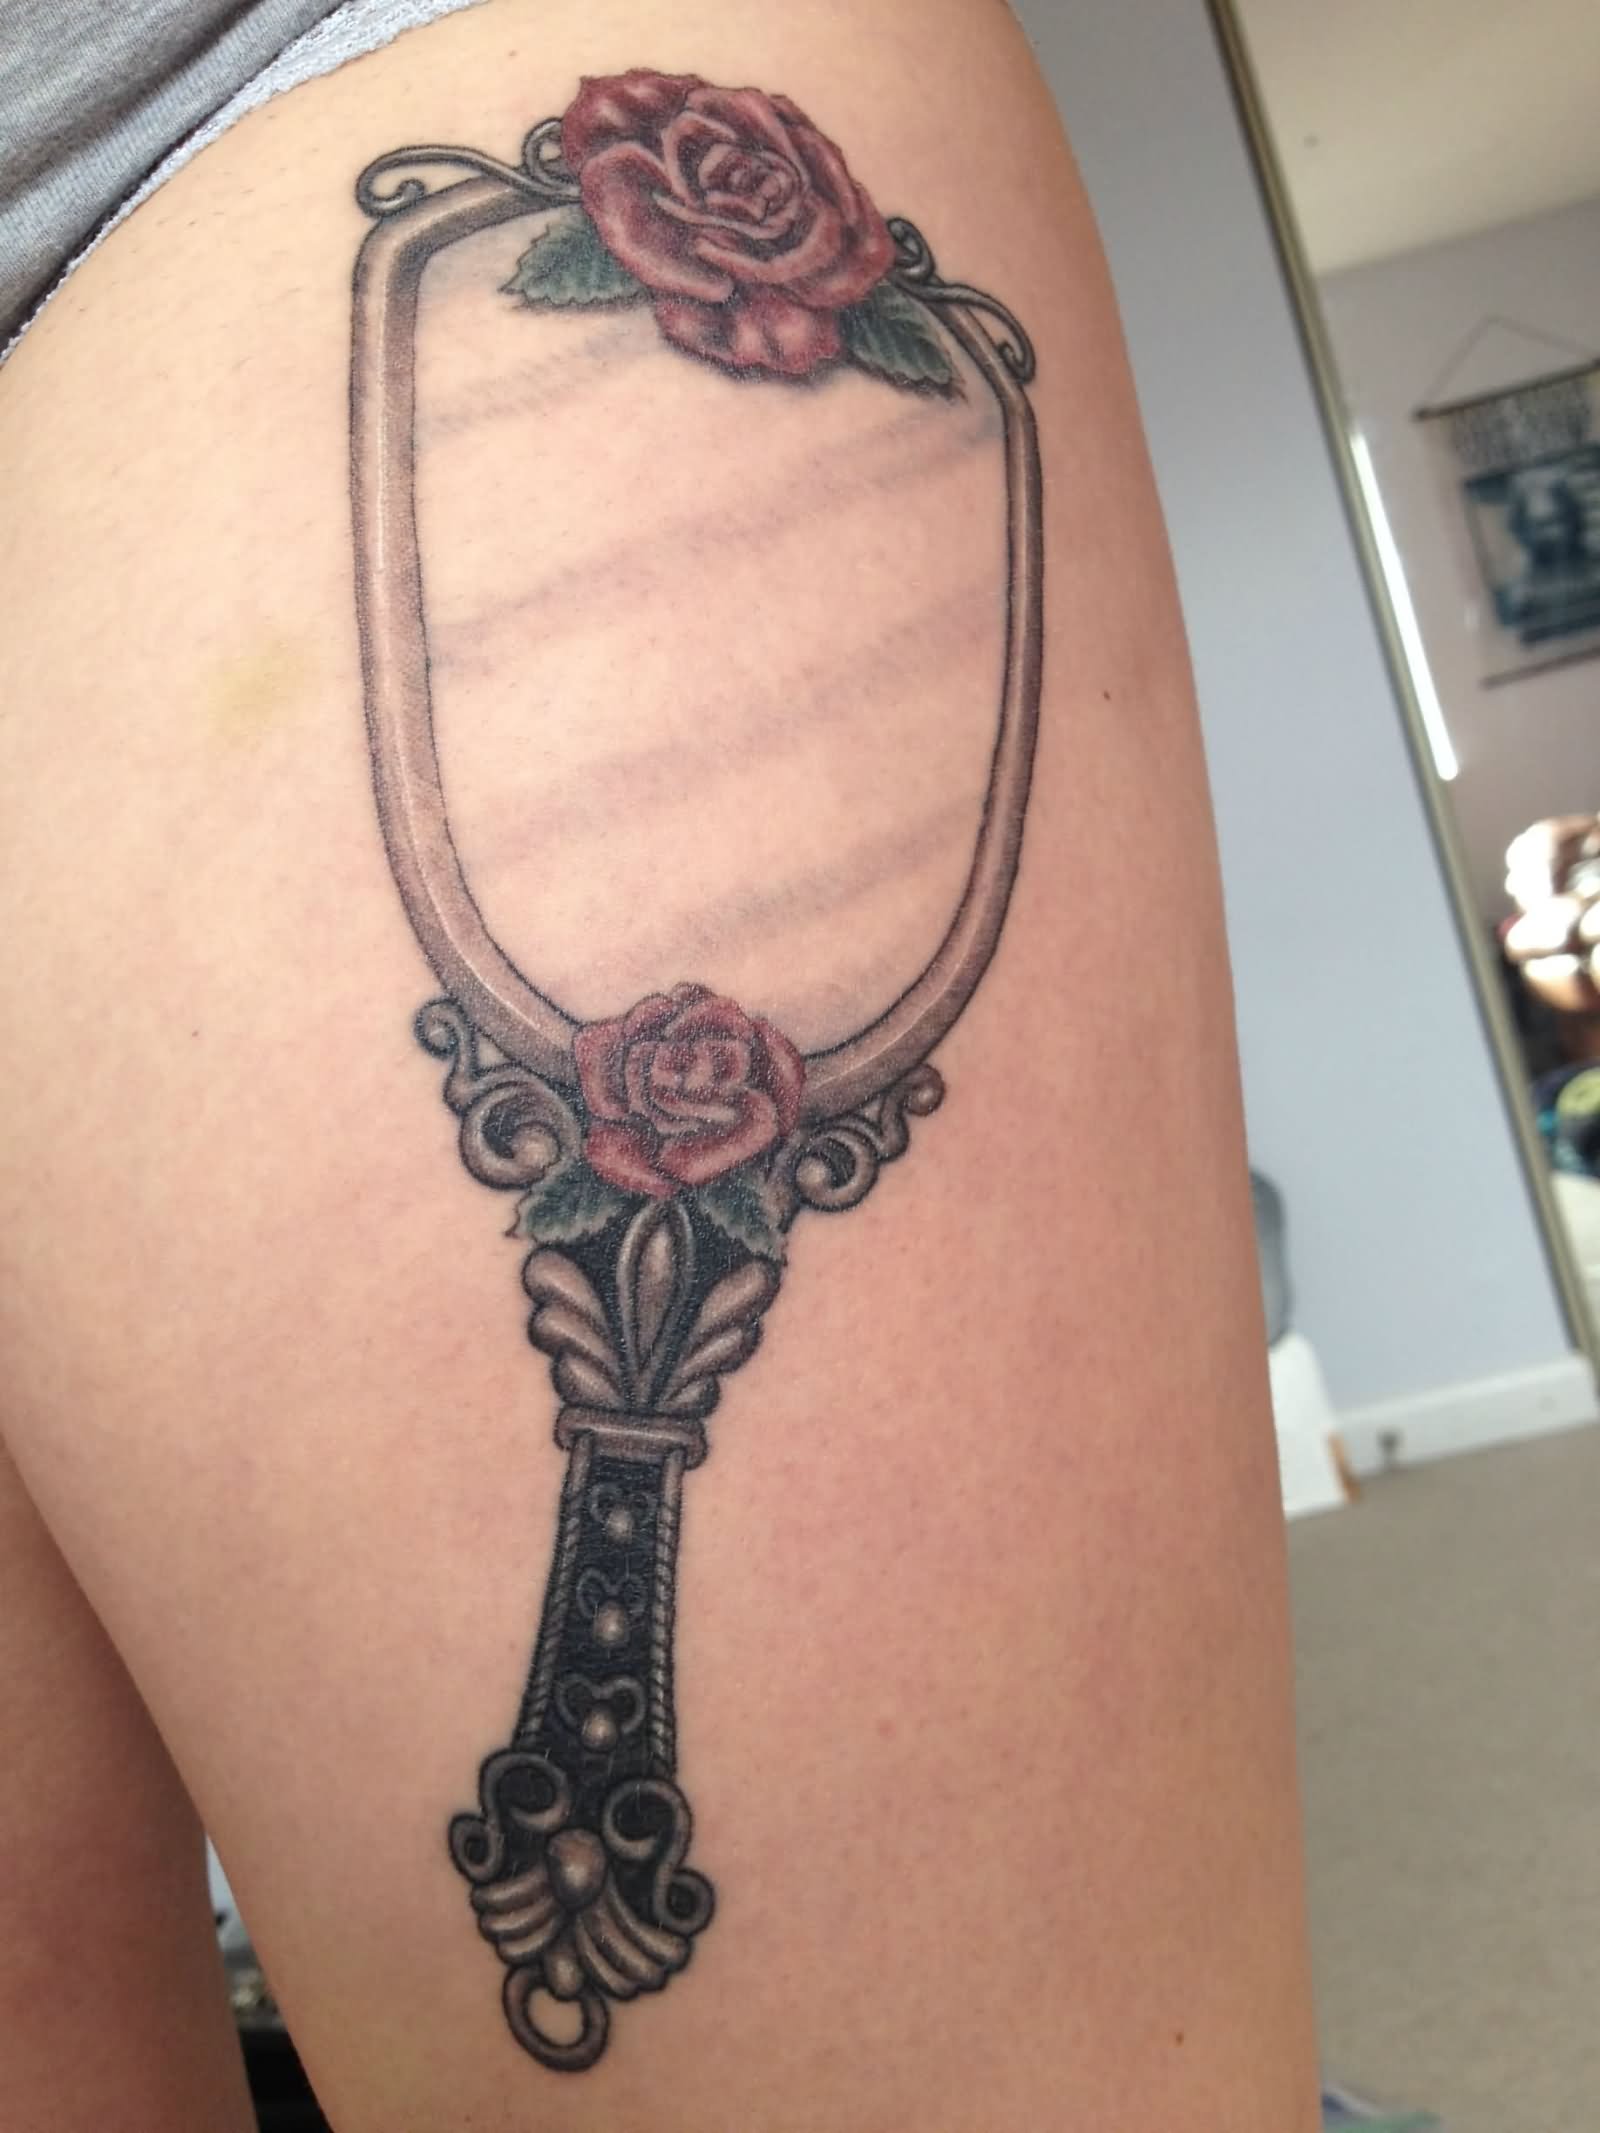 Rose Flowers And Hand Mirror Tattoo On Side Thigh